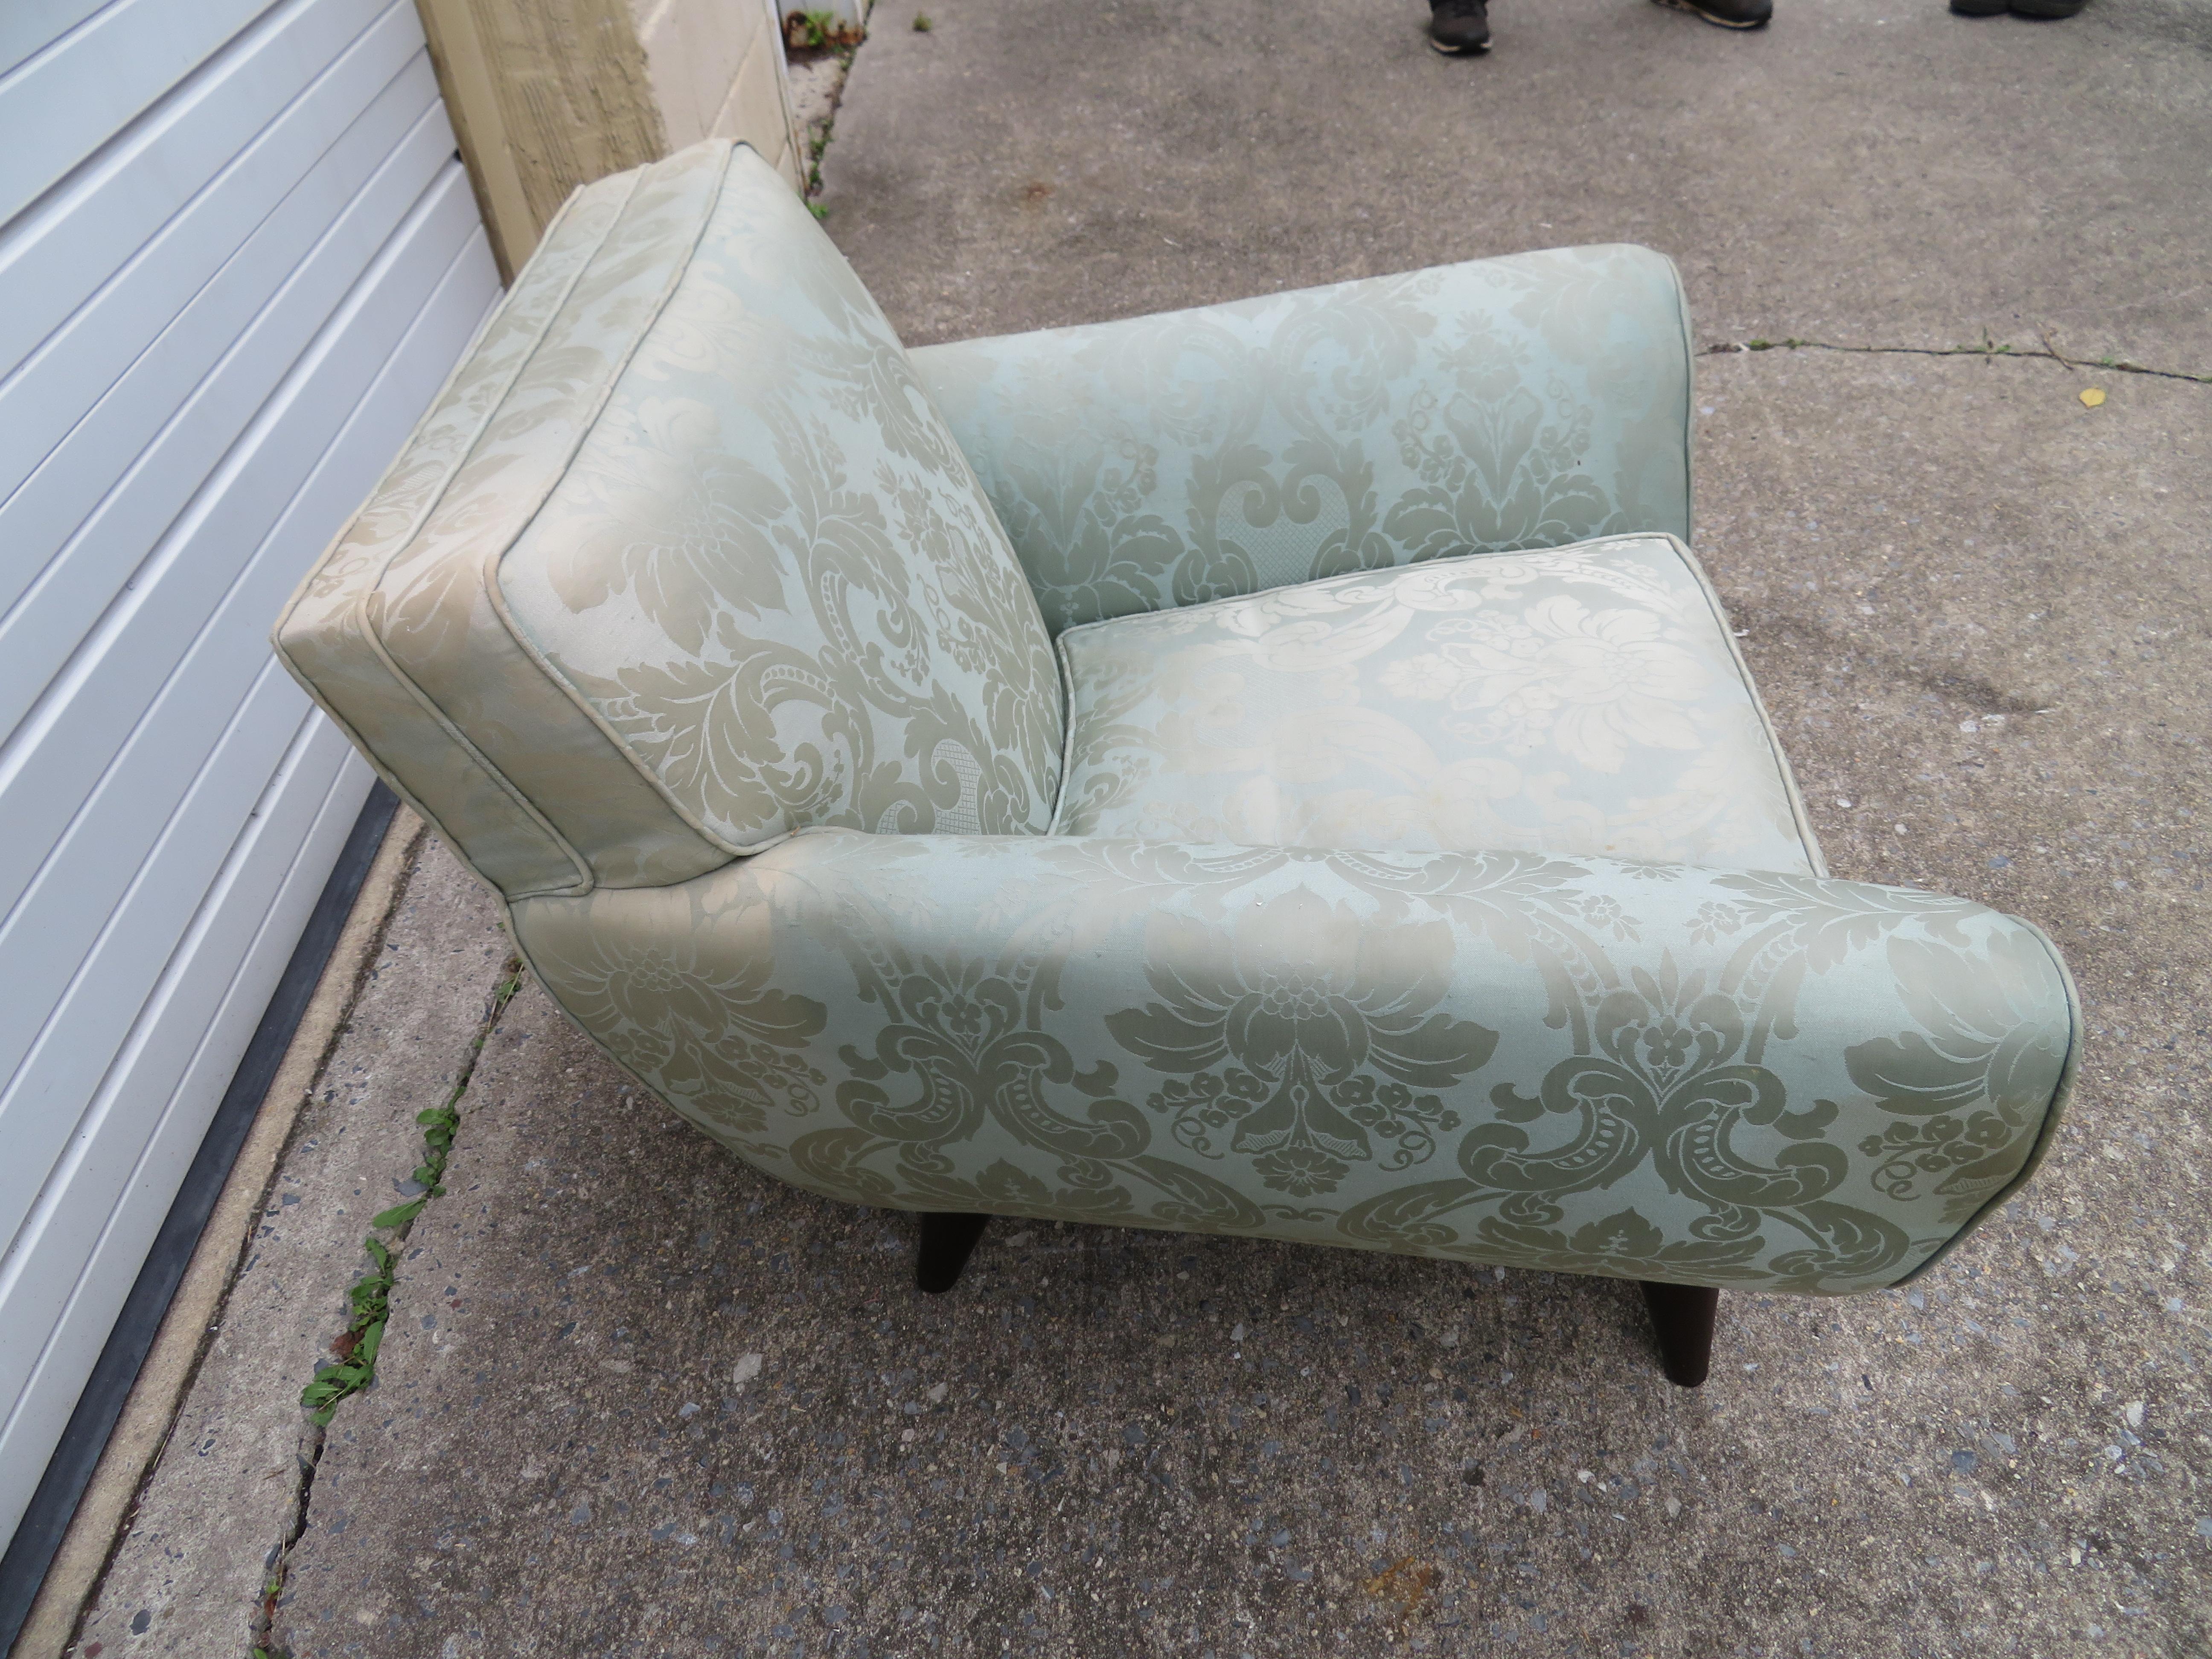 Mid-20th Century Italian Art Deco Lounge Armchair Attributed to Guglielmo Ulrich, circa 1940s For Sale